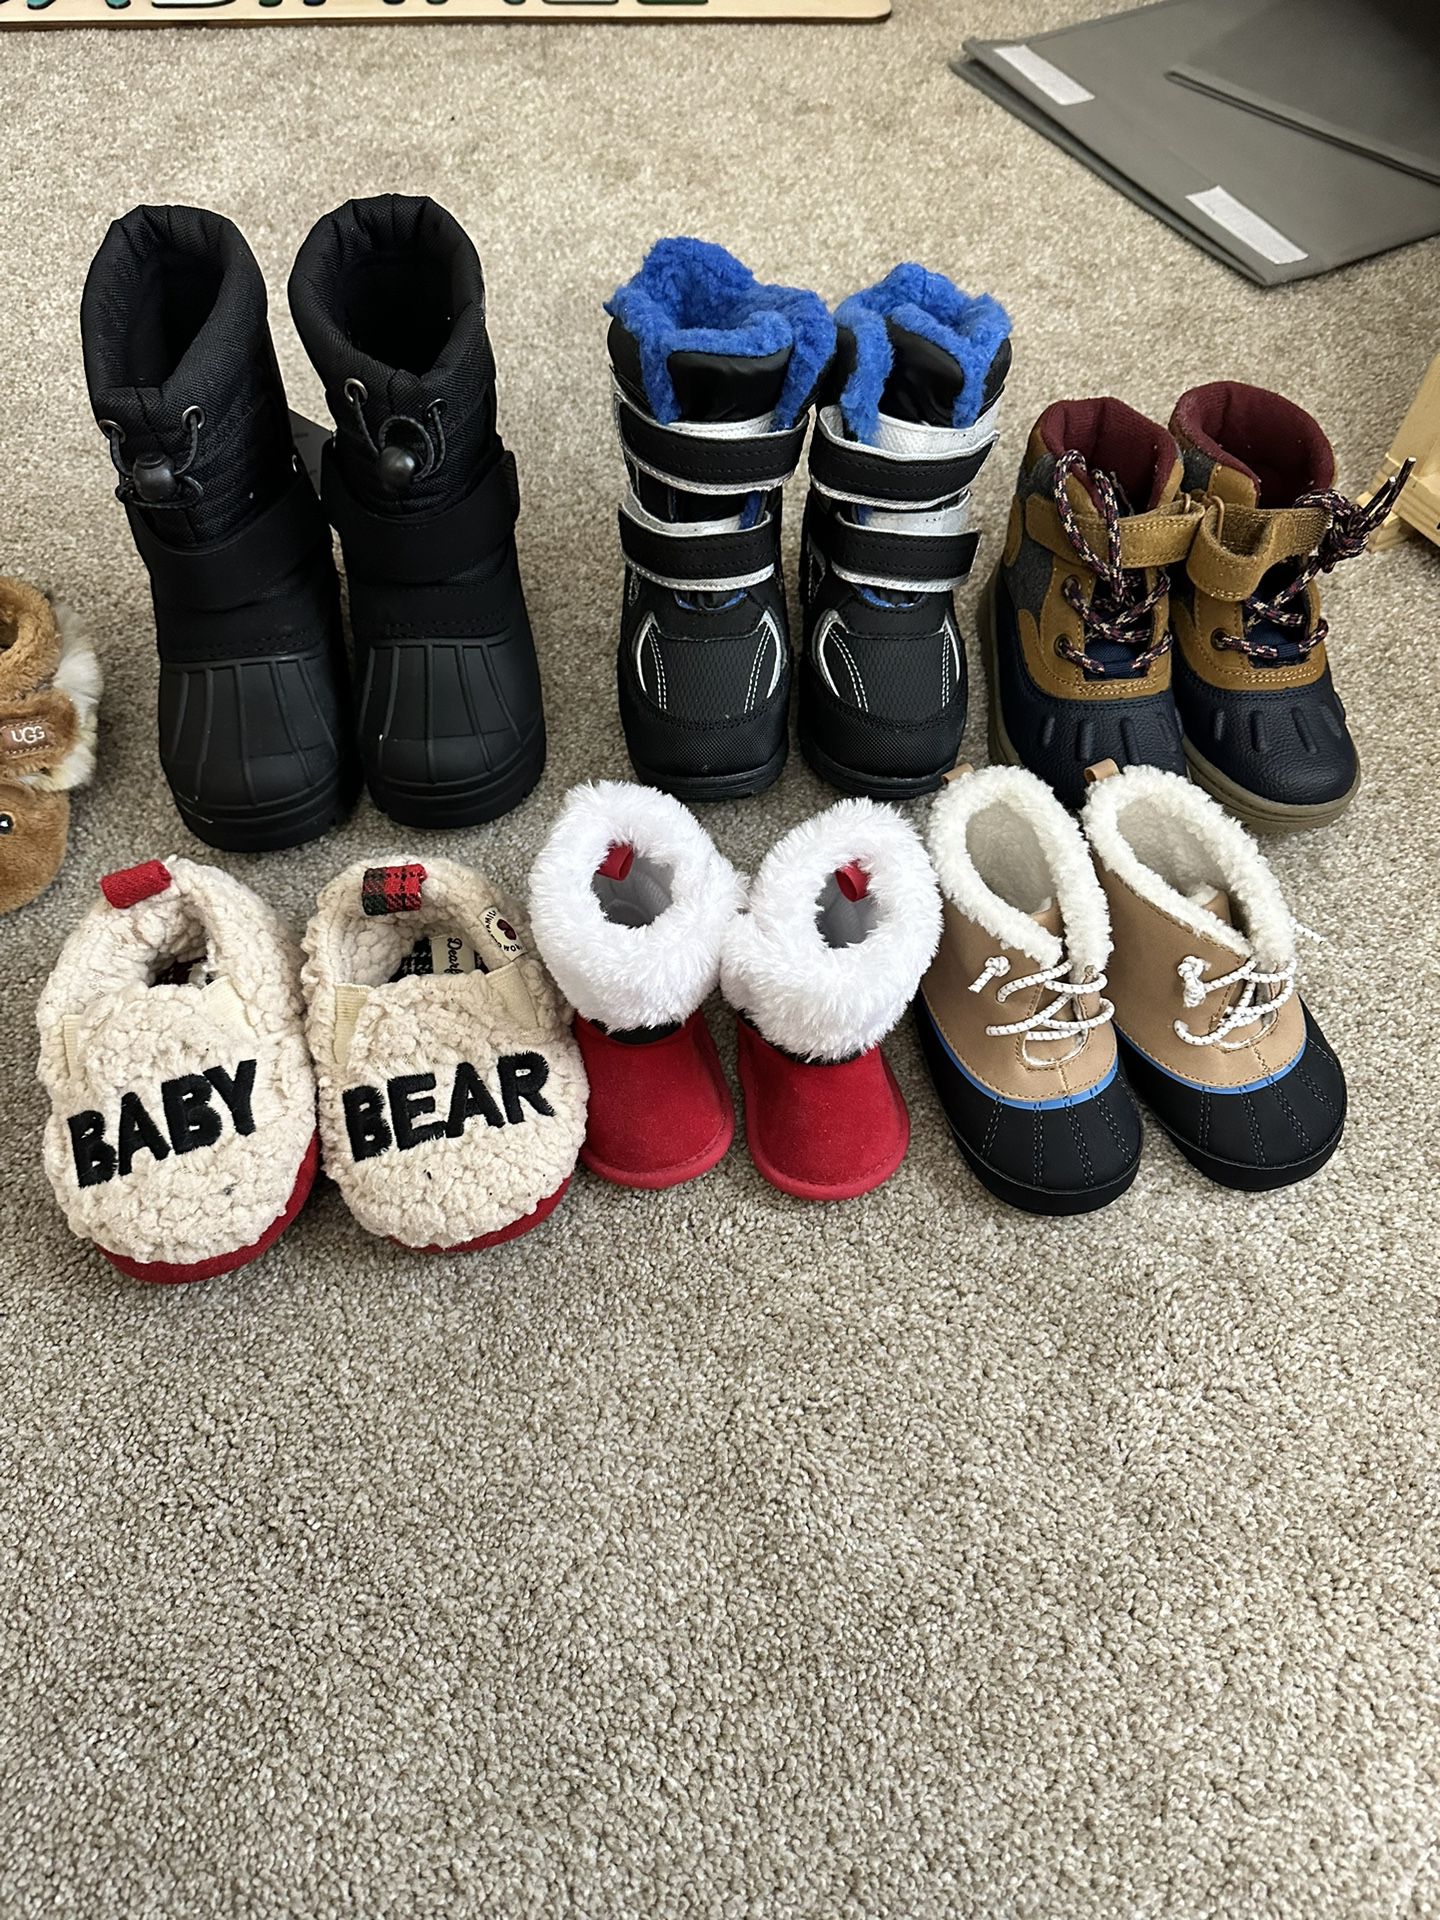 Baby Shoes!!